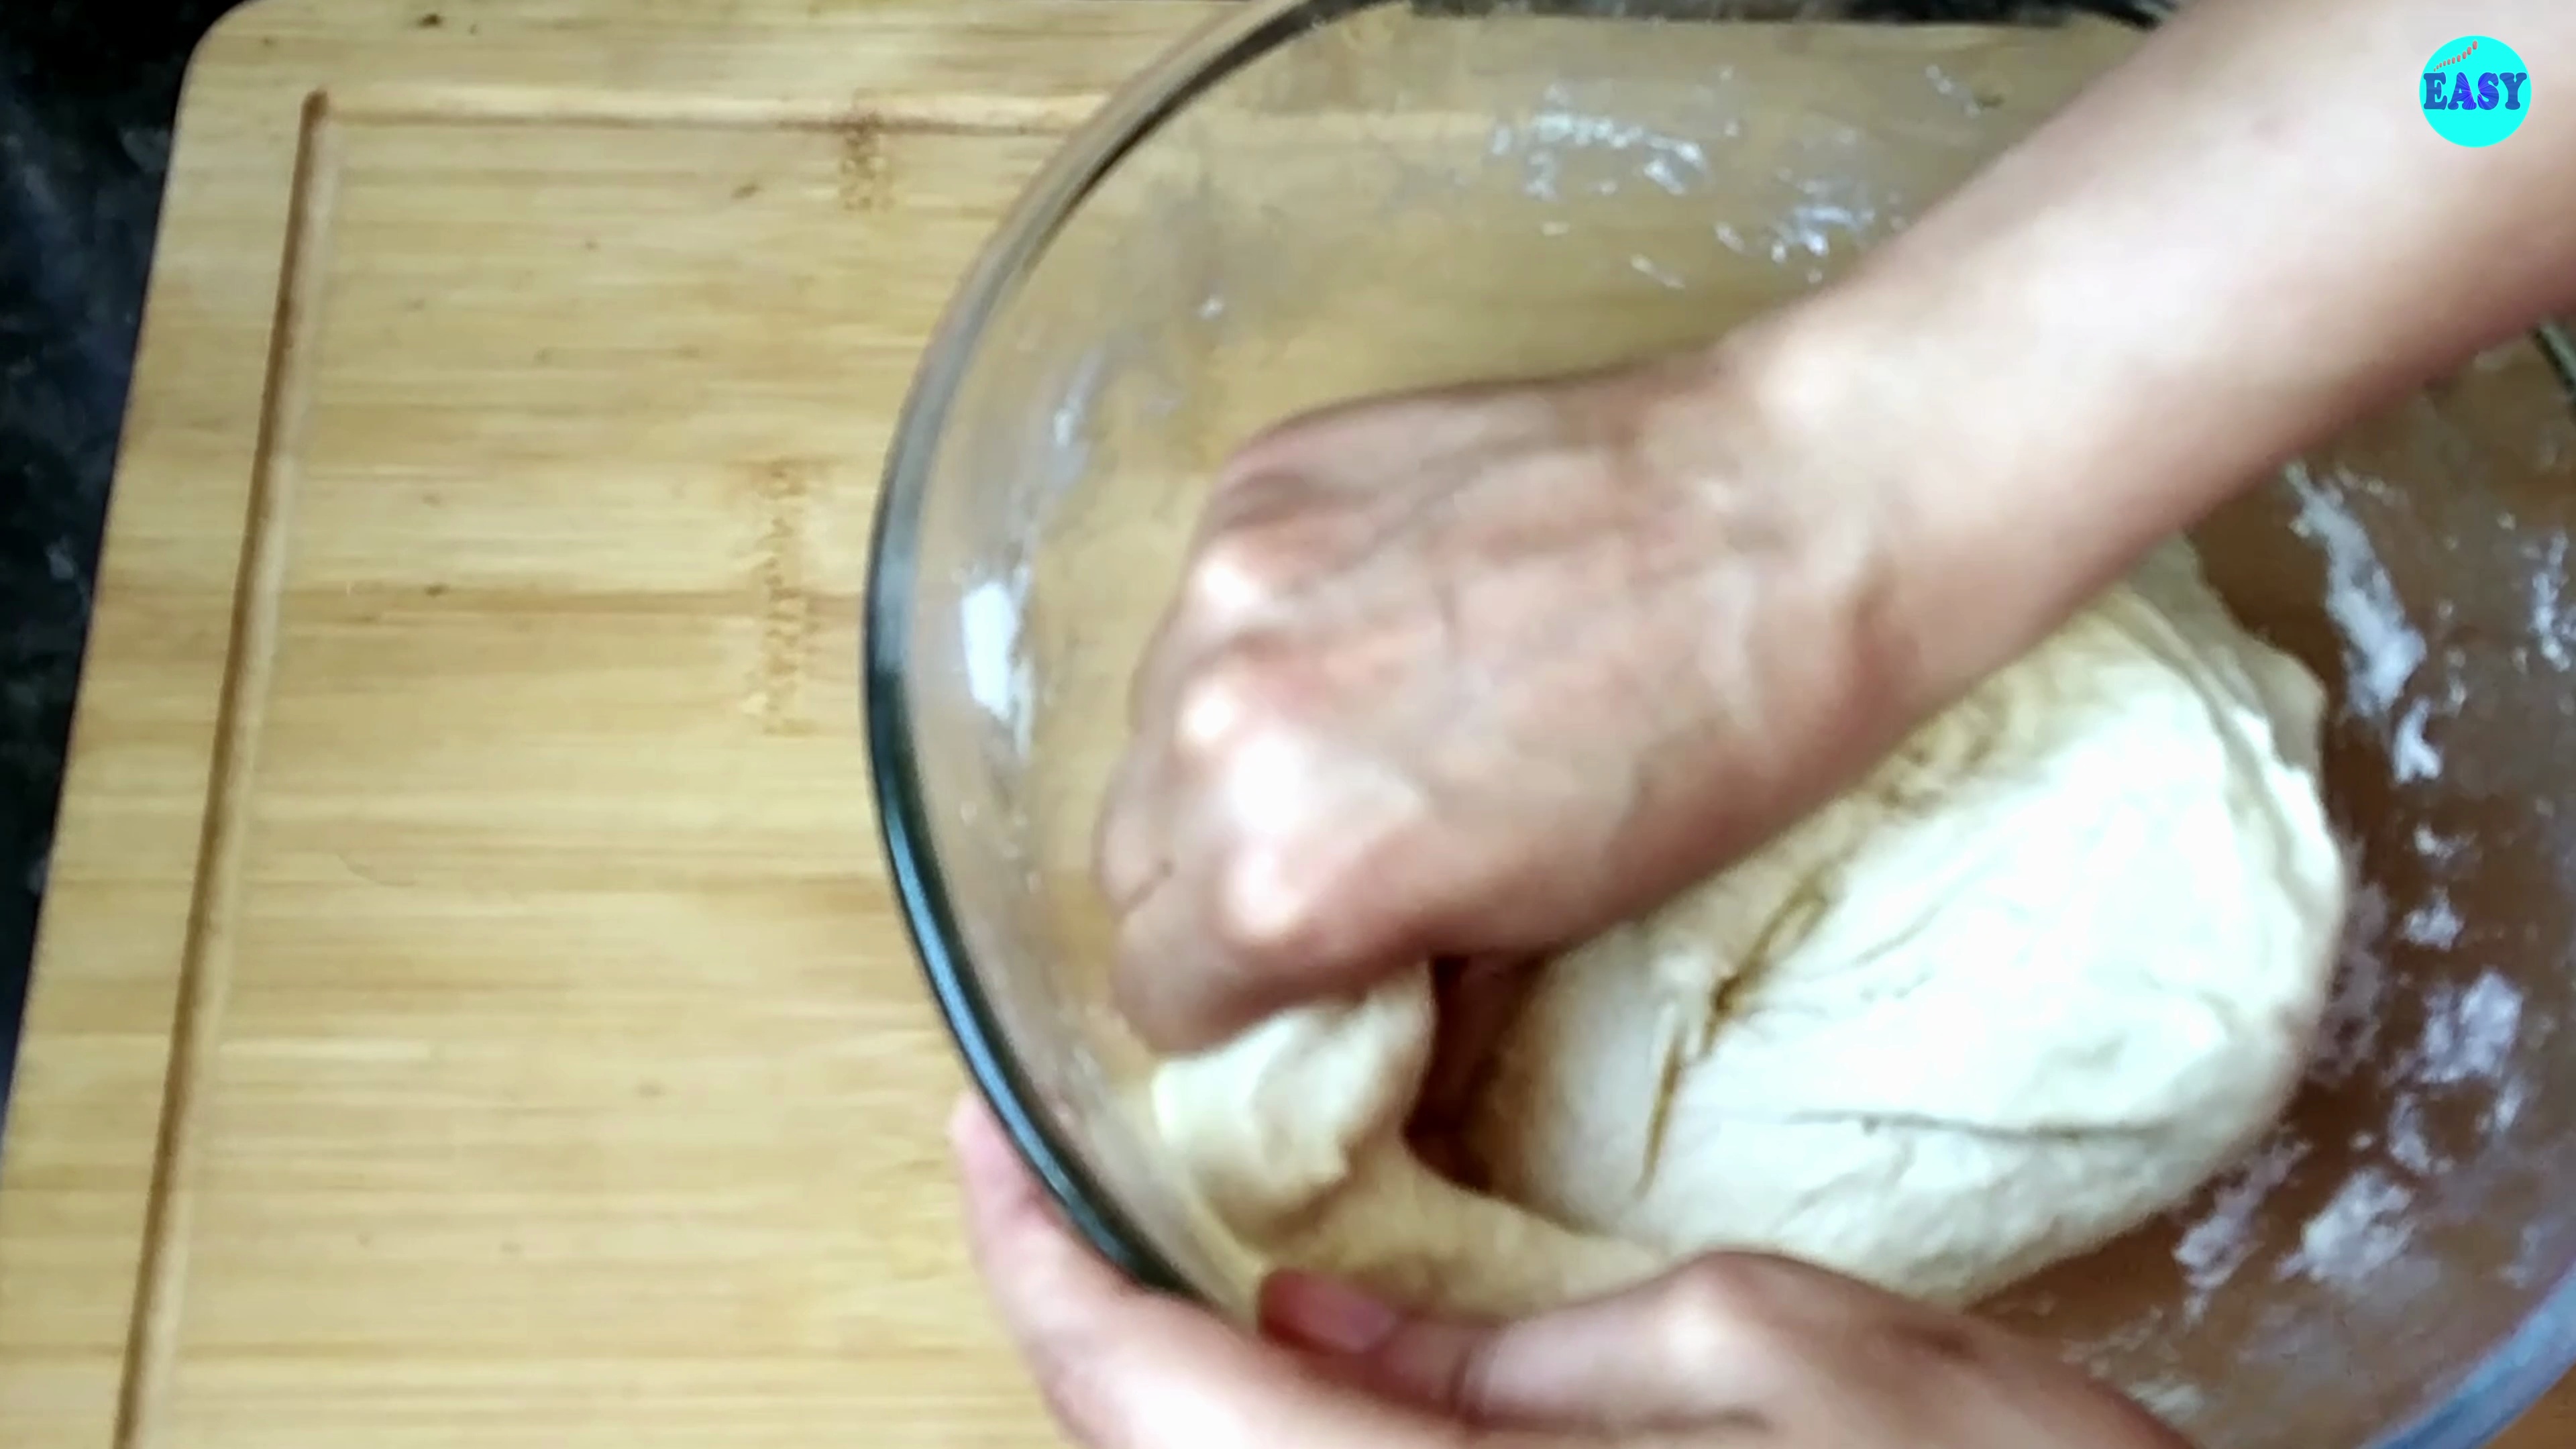 Step 3 - Knead the dough for 5-10 minutes, until it becomes smooth and elastic.